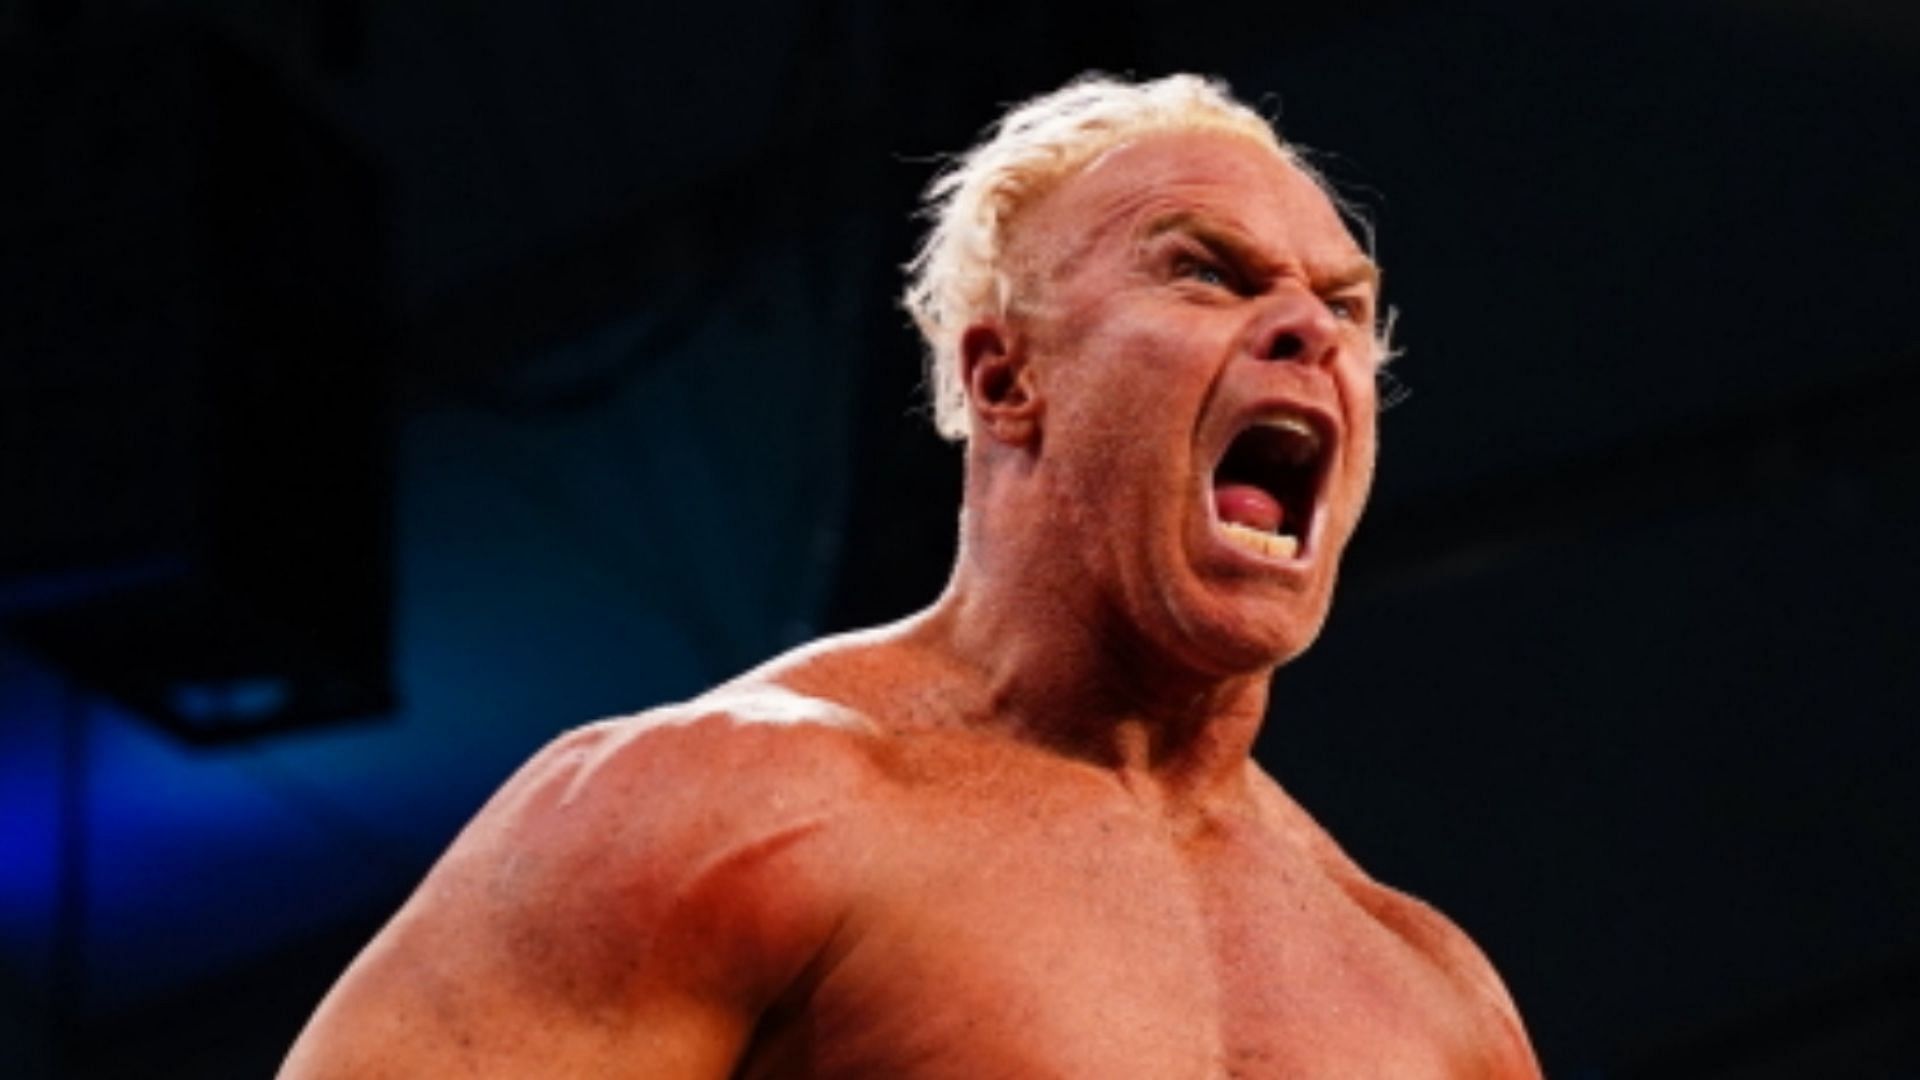 Billy Gunn at an AEW event in Daily&#039;s Place!